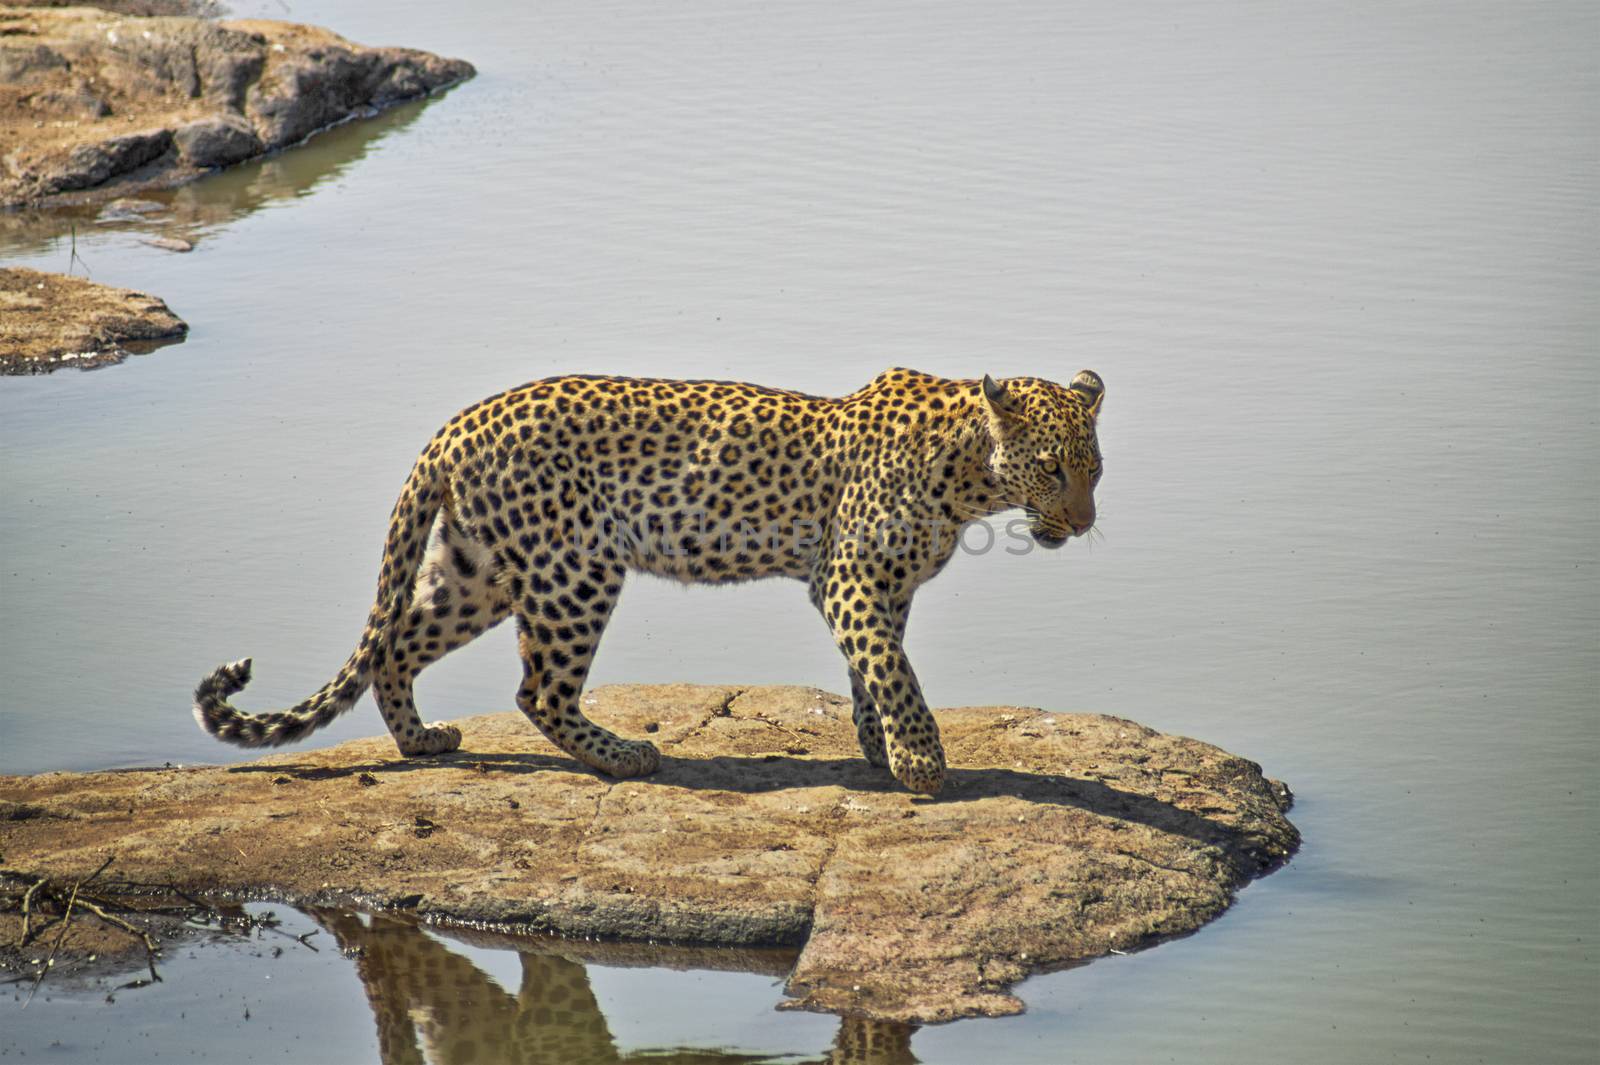 Leopard standing on a rock by a lake by Sportactive